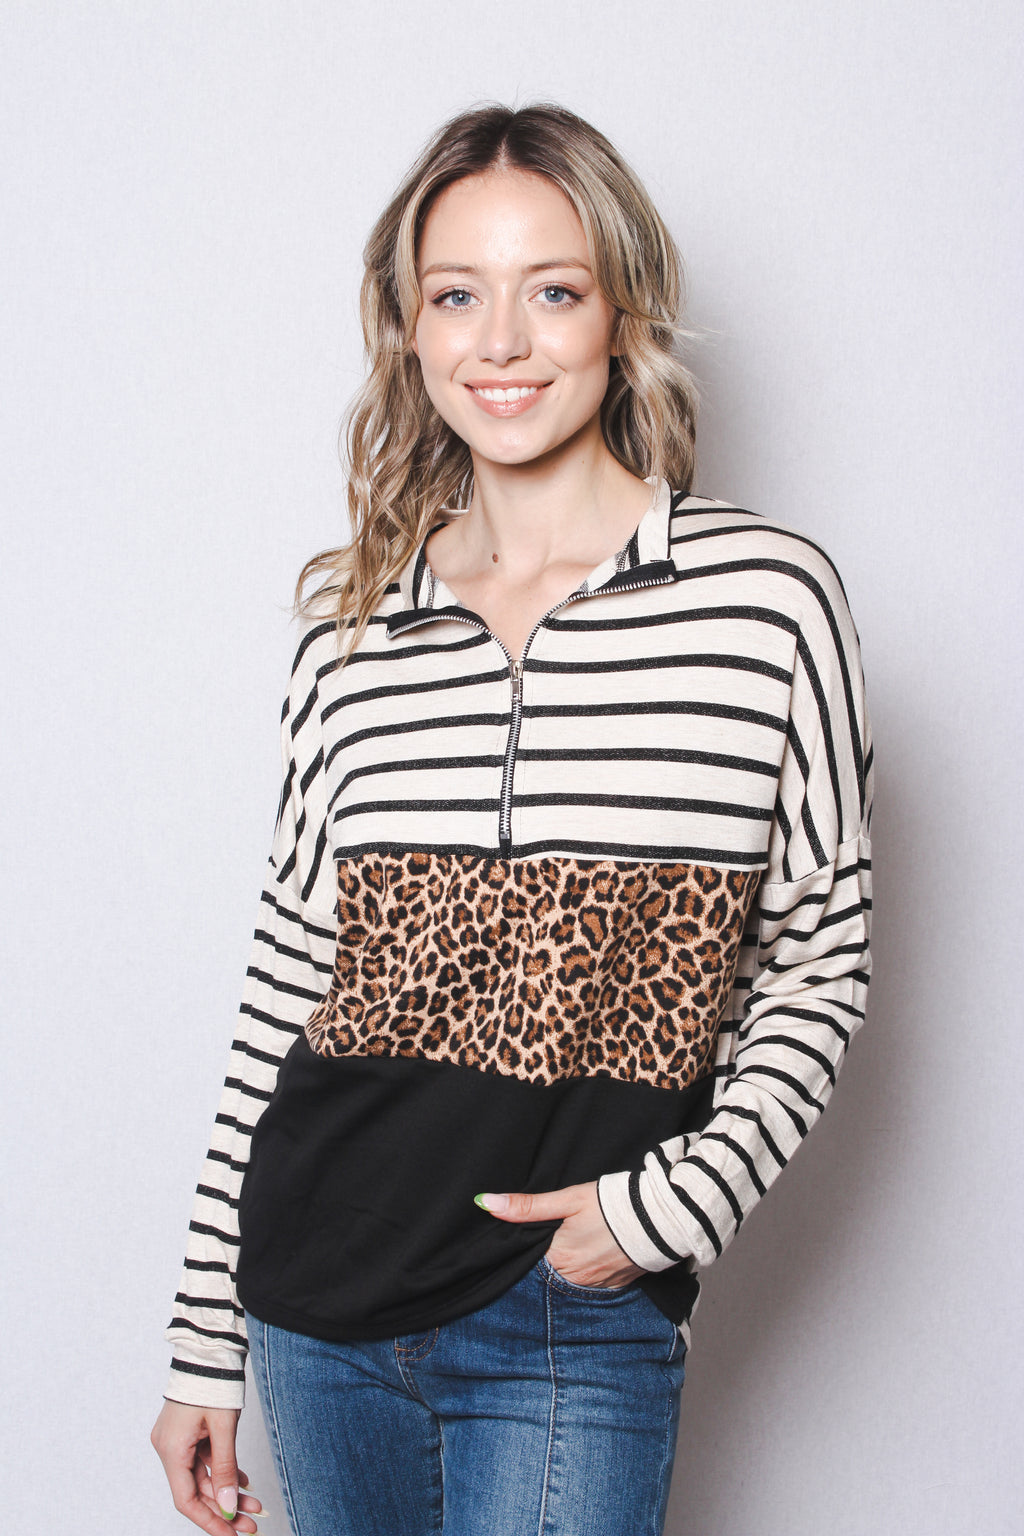 Women's Zipped Up Long Sleeves Animal Print Striped Color Block Top